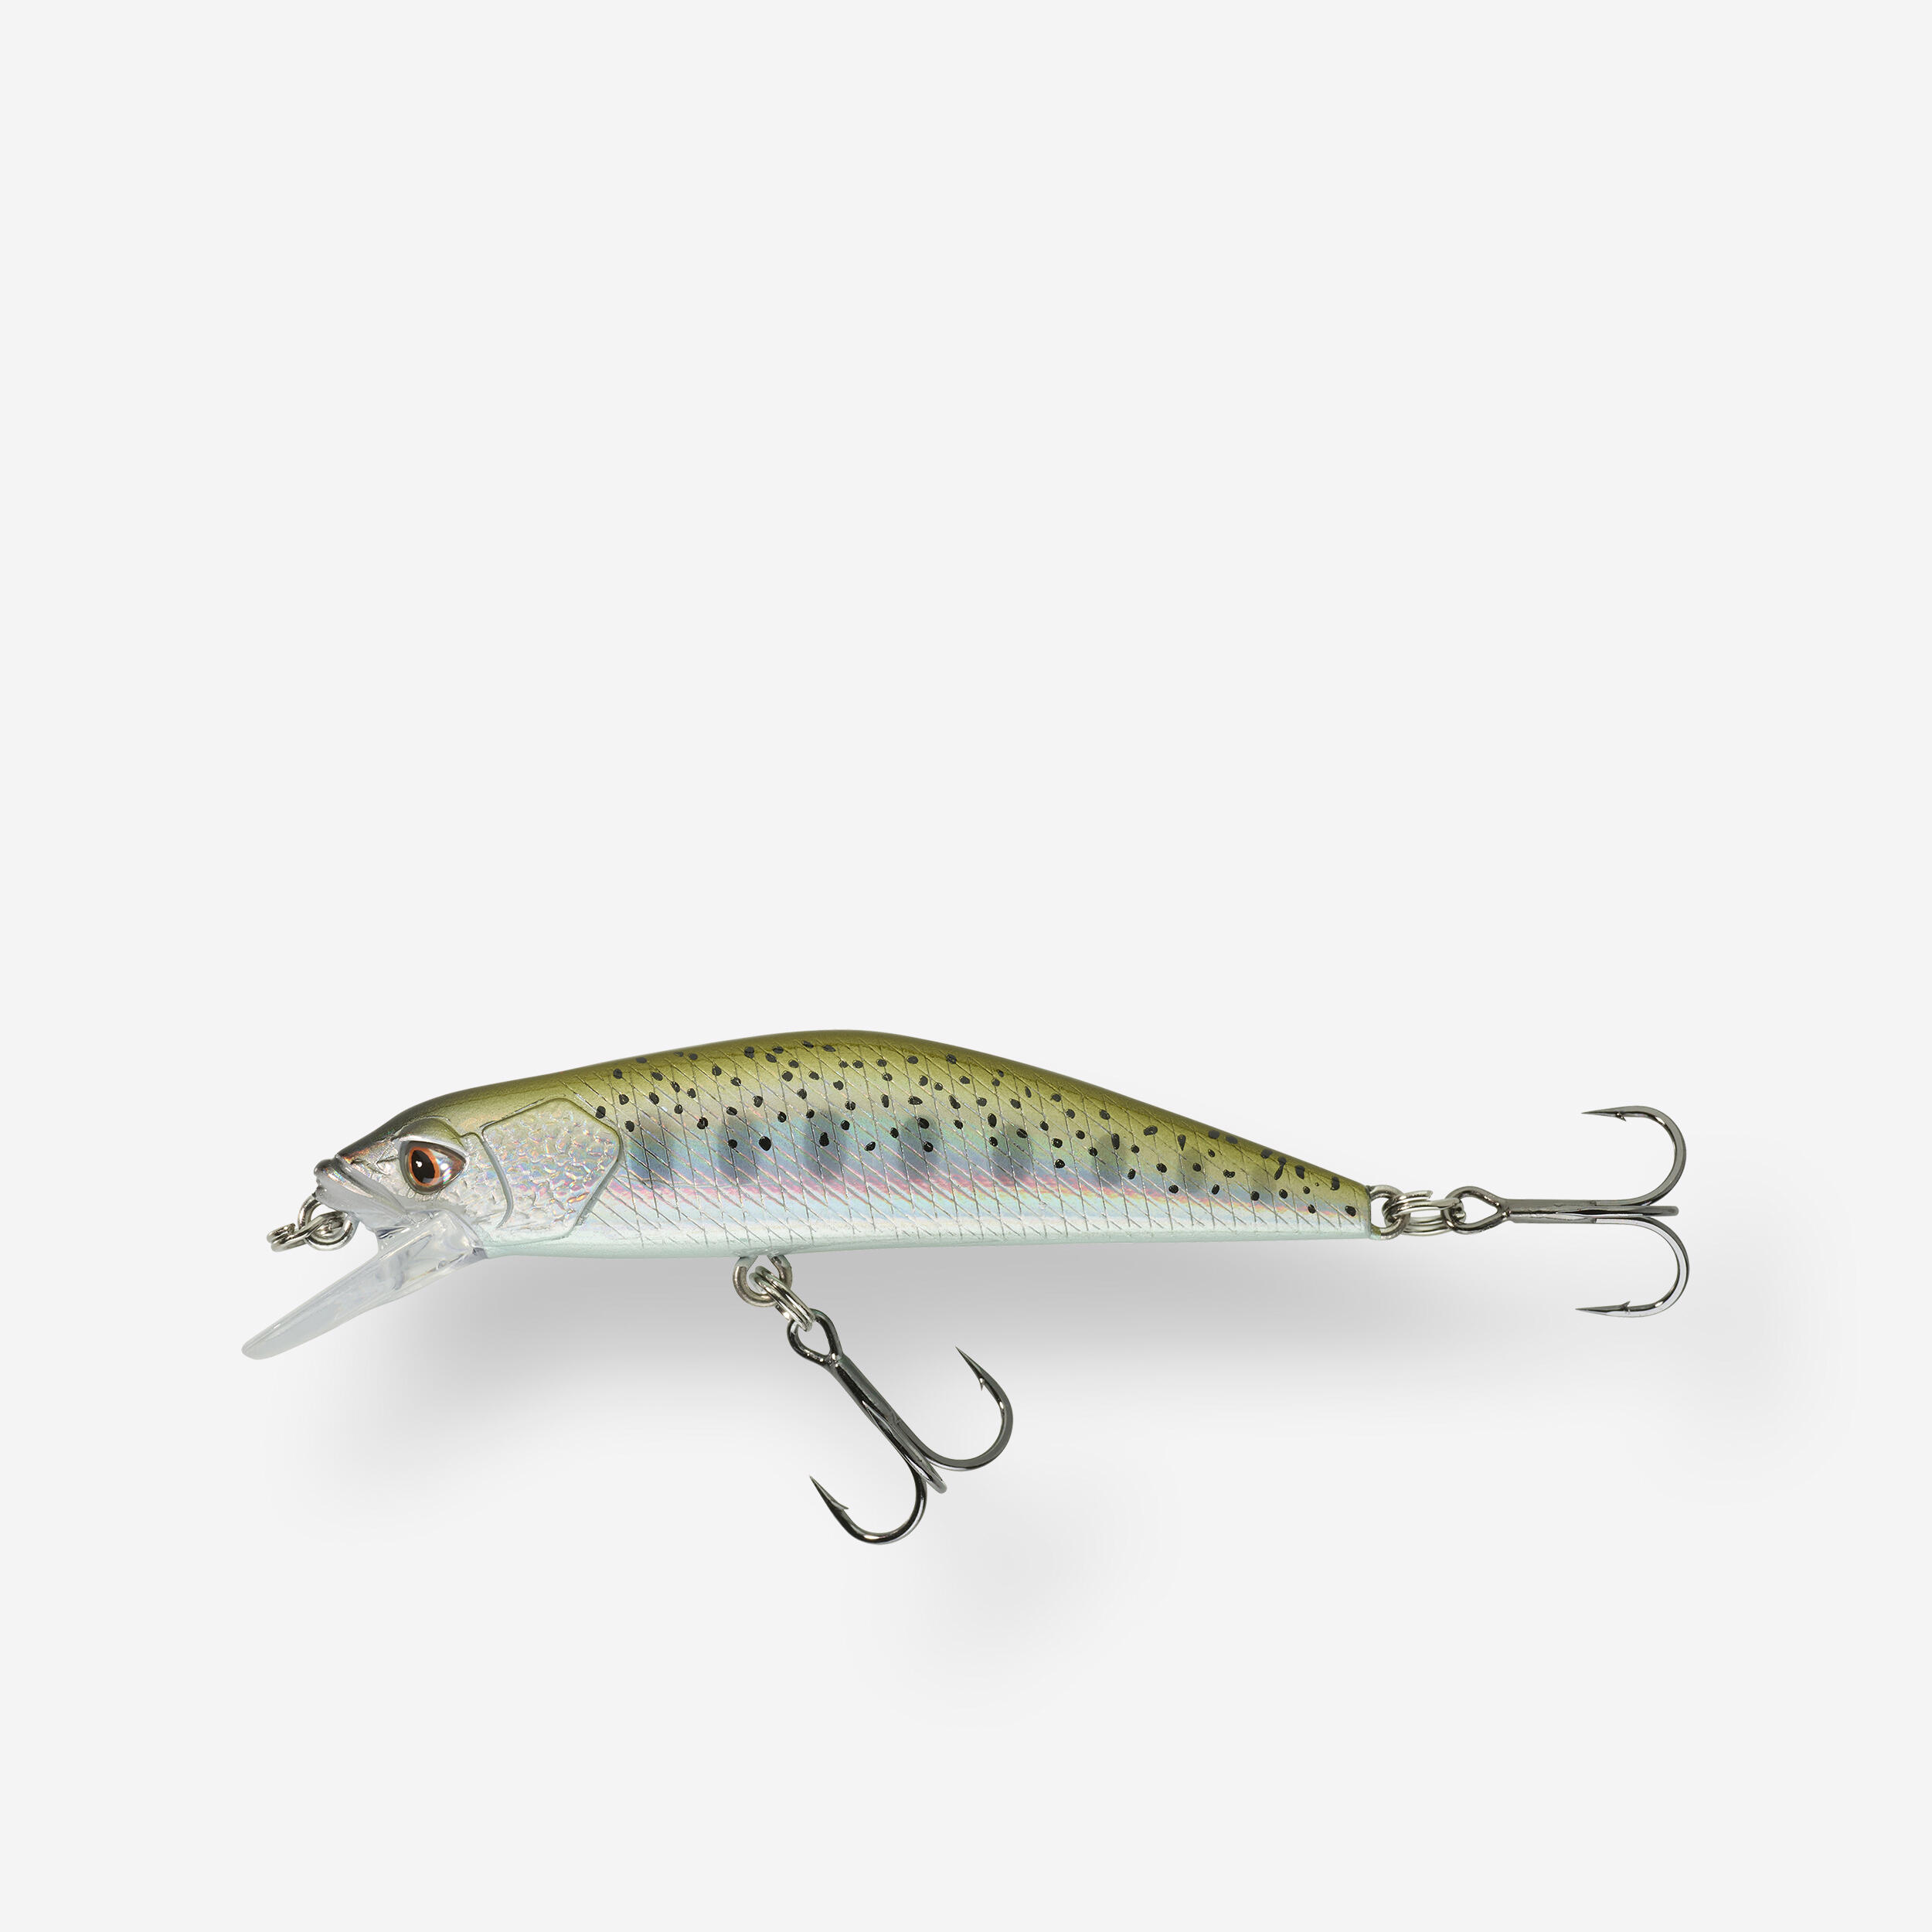 MINNOW HARD LURE FOR TROUT MNWFS US 70 YAMAME 1/4